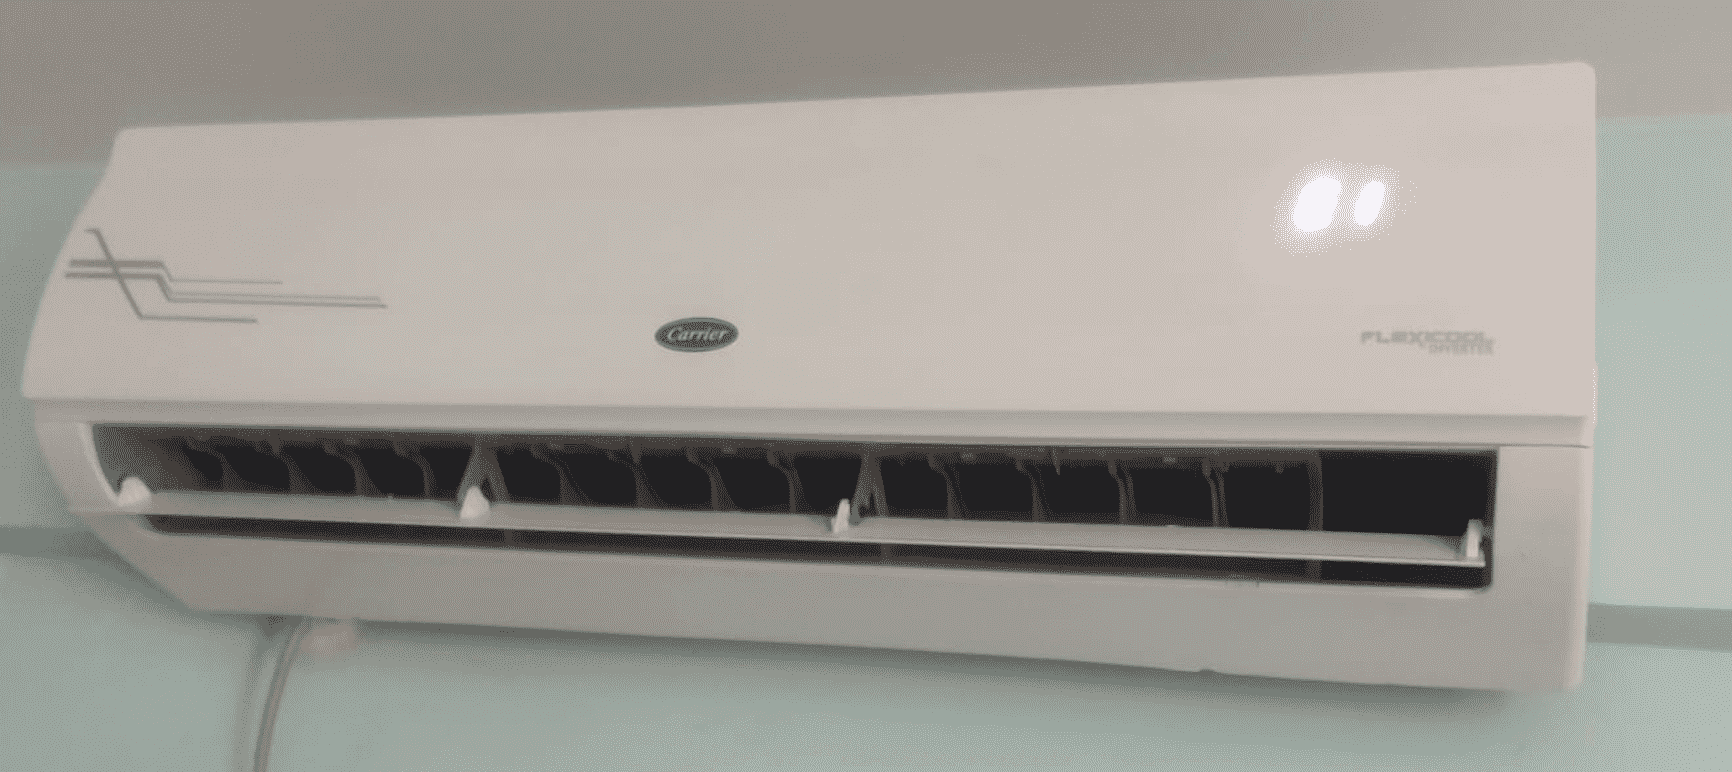 how to turn off light on Carrier air conditioner